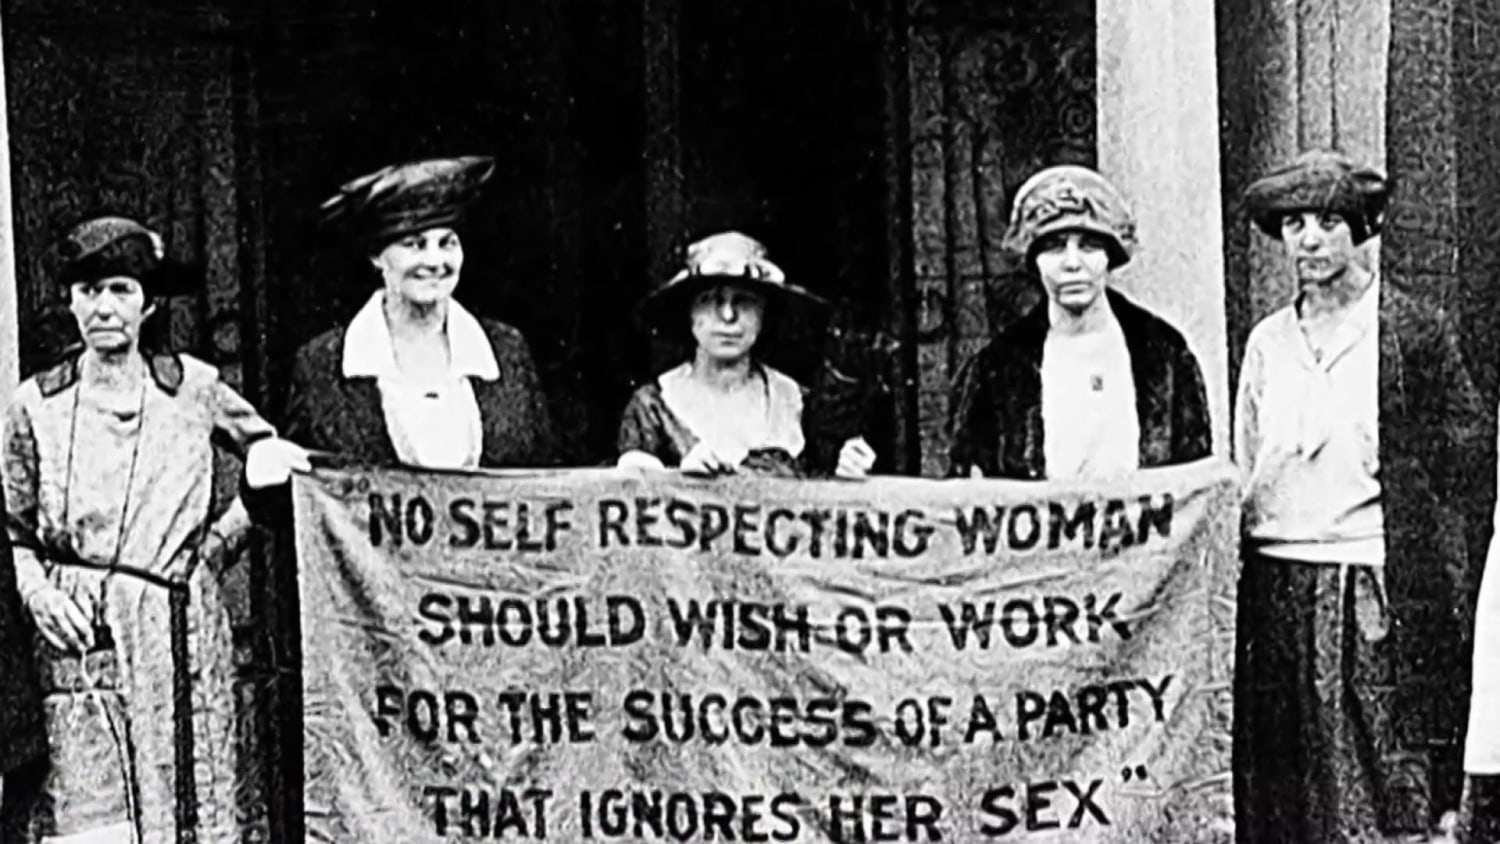 Tuesday marks 100 years since women were given the right to vote